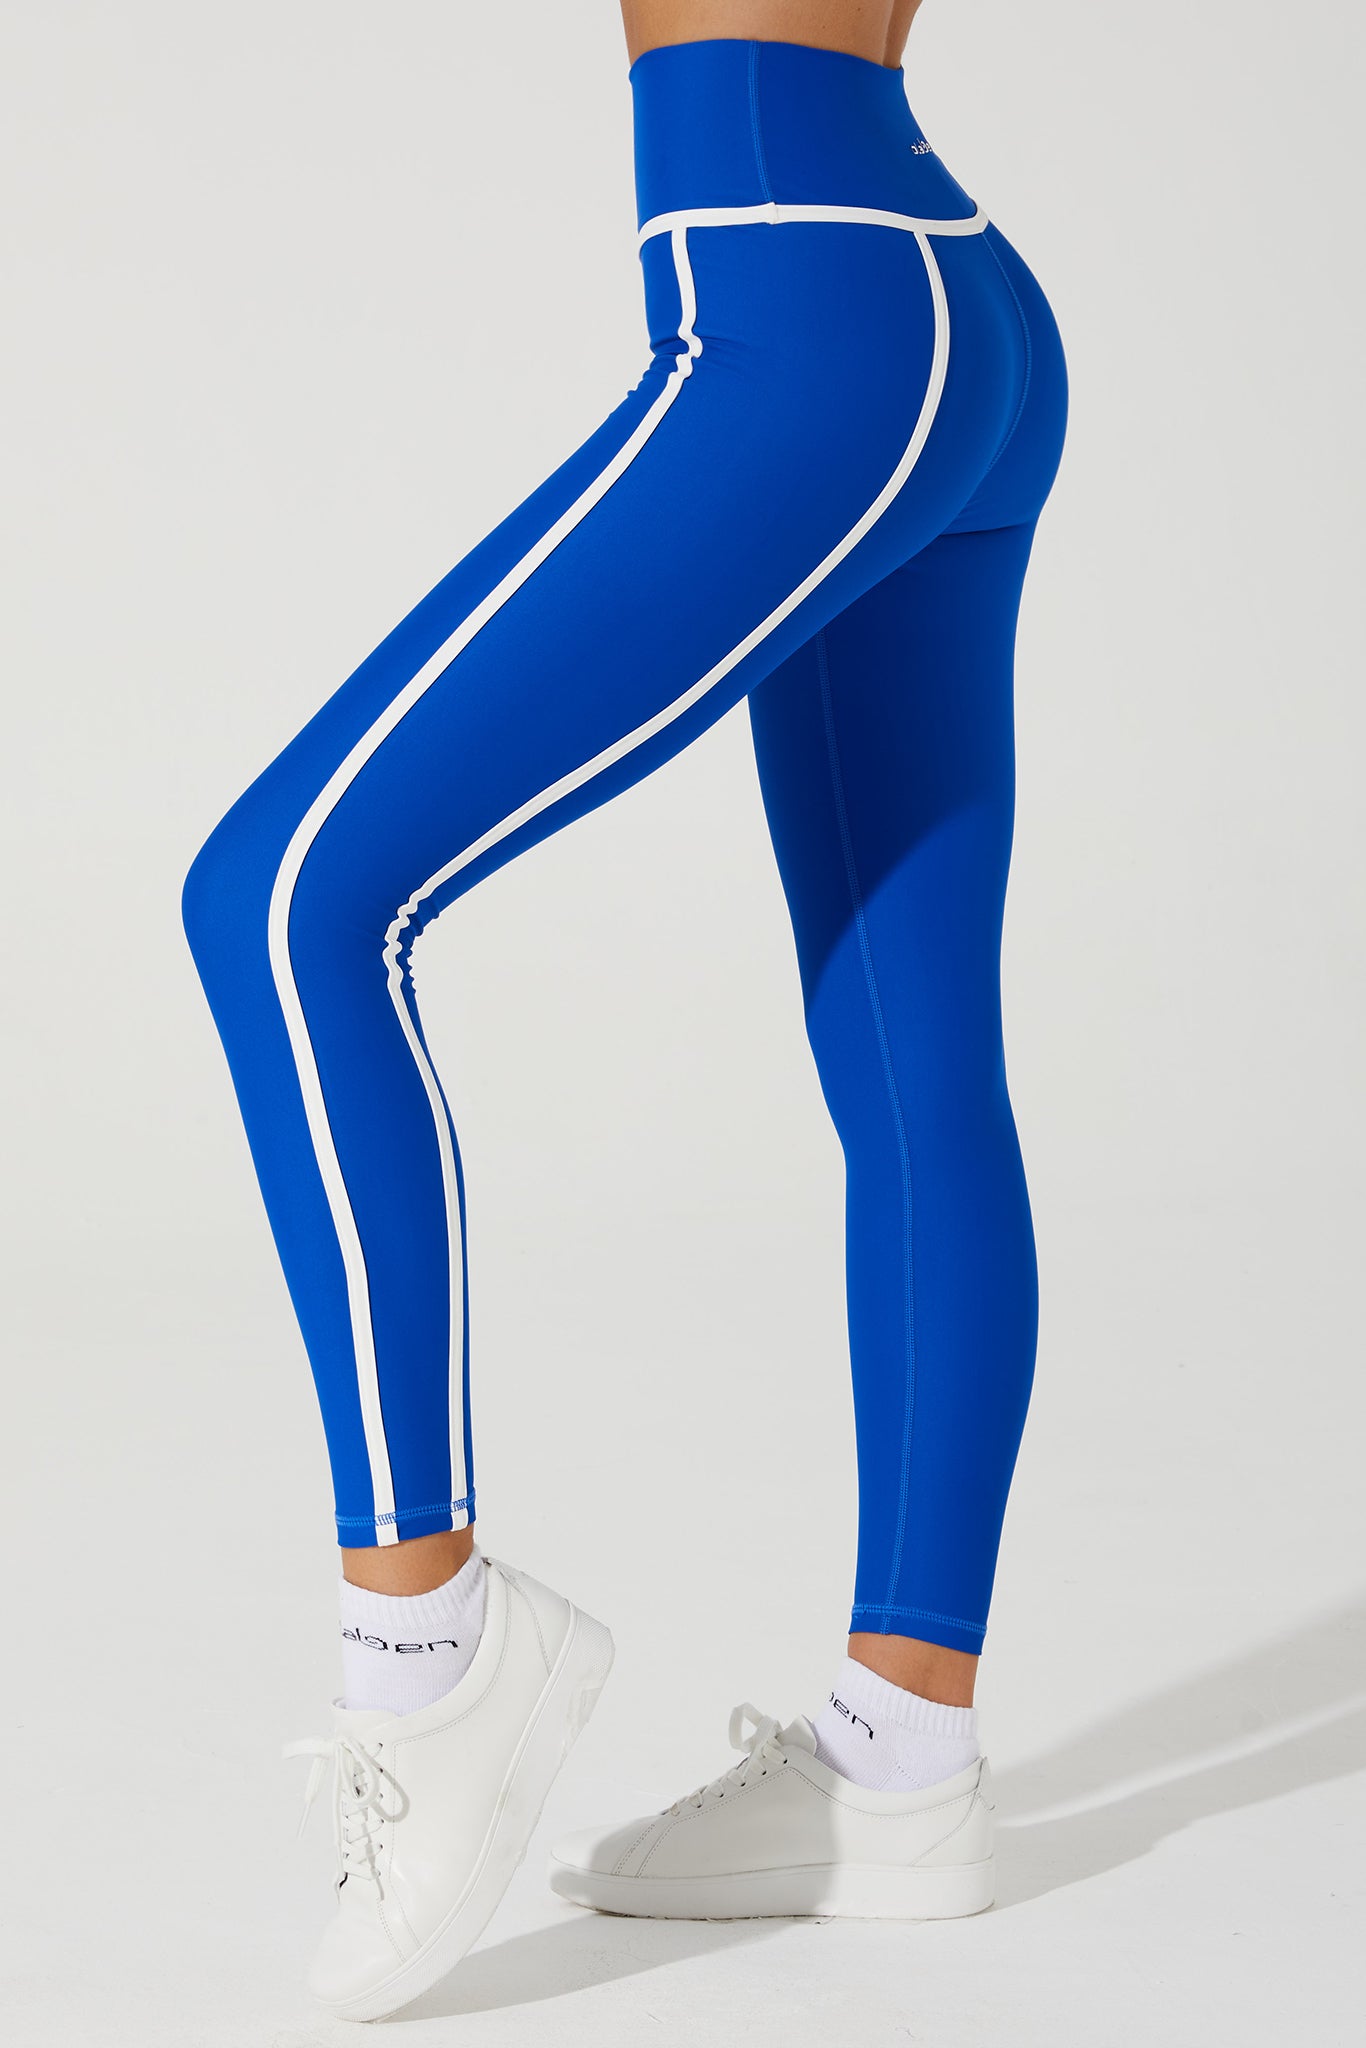 Stylish Atlantis Blue women's leggings with a ludic design, perfect for active and trendy individuals.